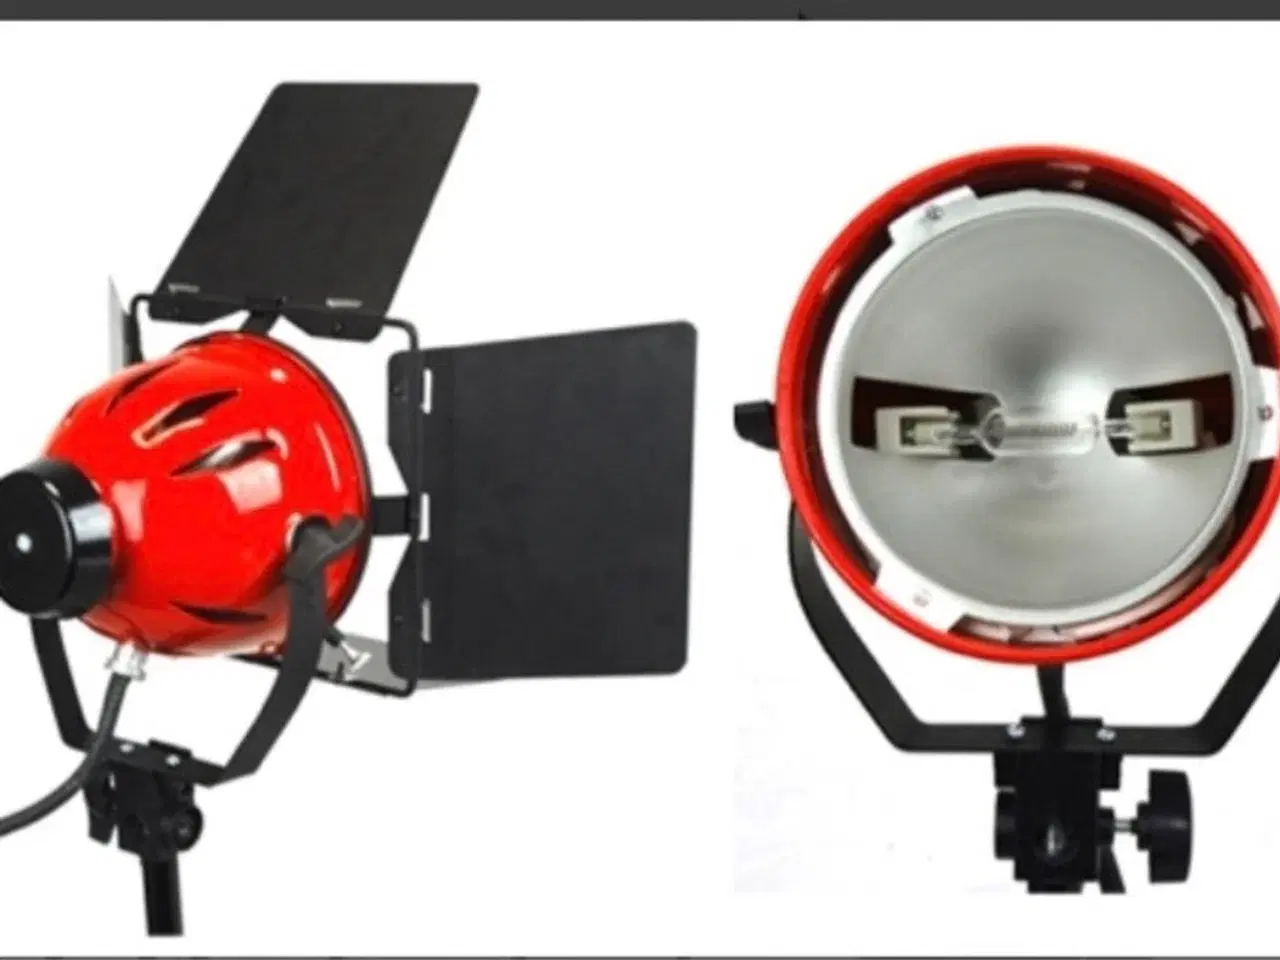 Billede 3 - 3 REDHEAD STUDIO lights with dimmer switches